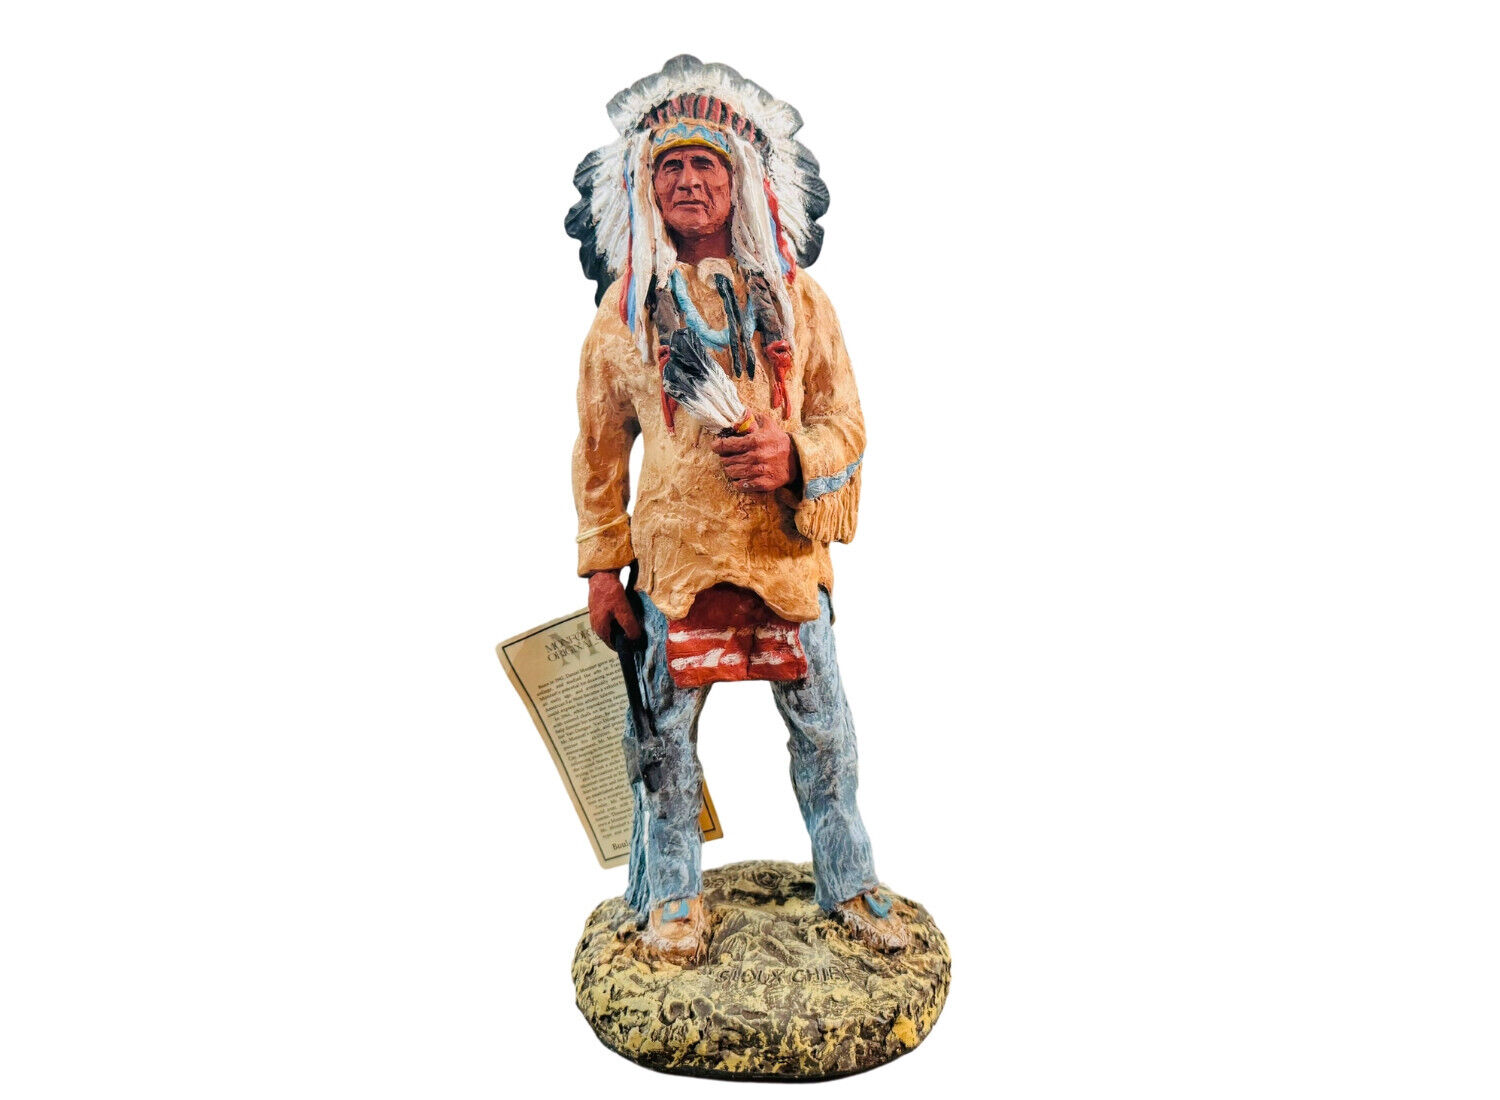 SIOUX CHIEF SCULPTURE BY DANIEL R. MUNFORD - SIGNED BY ARTIST 1986